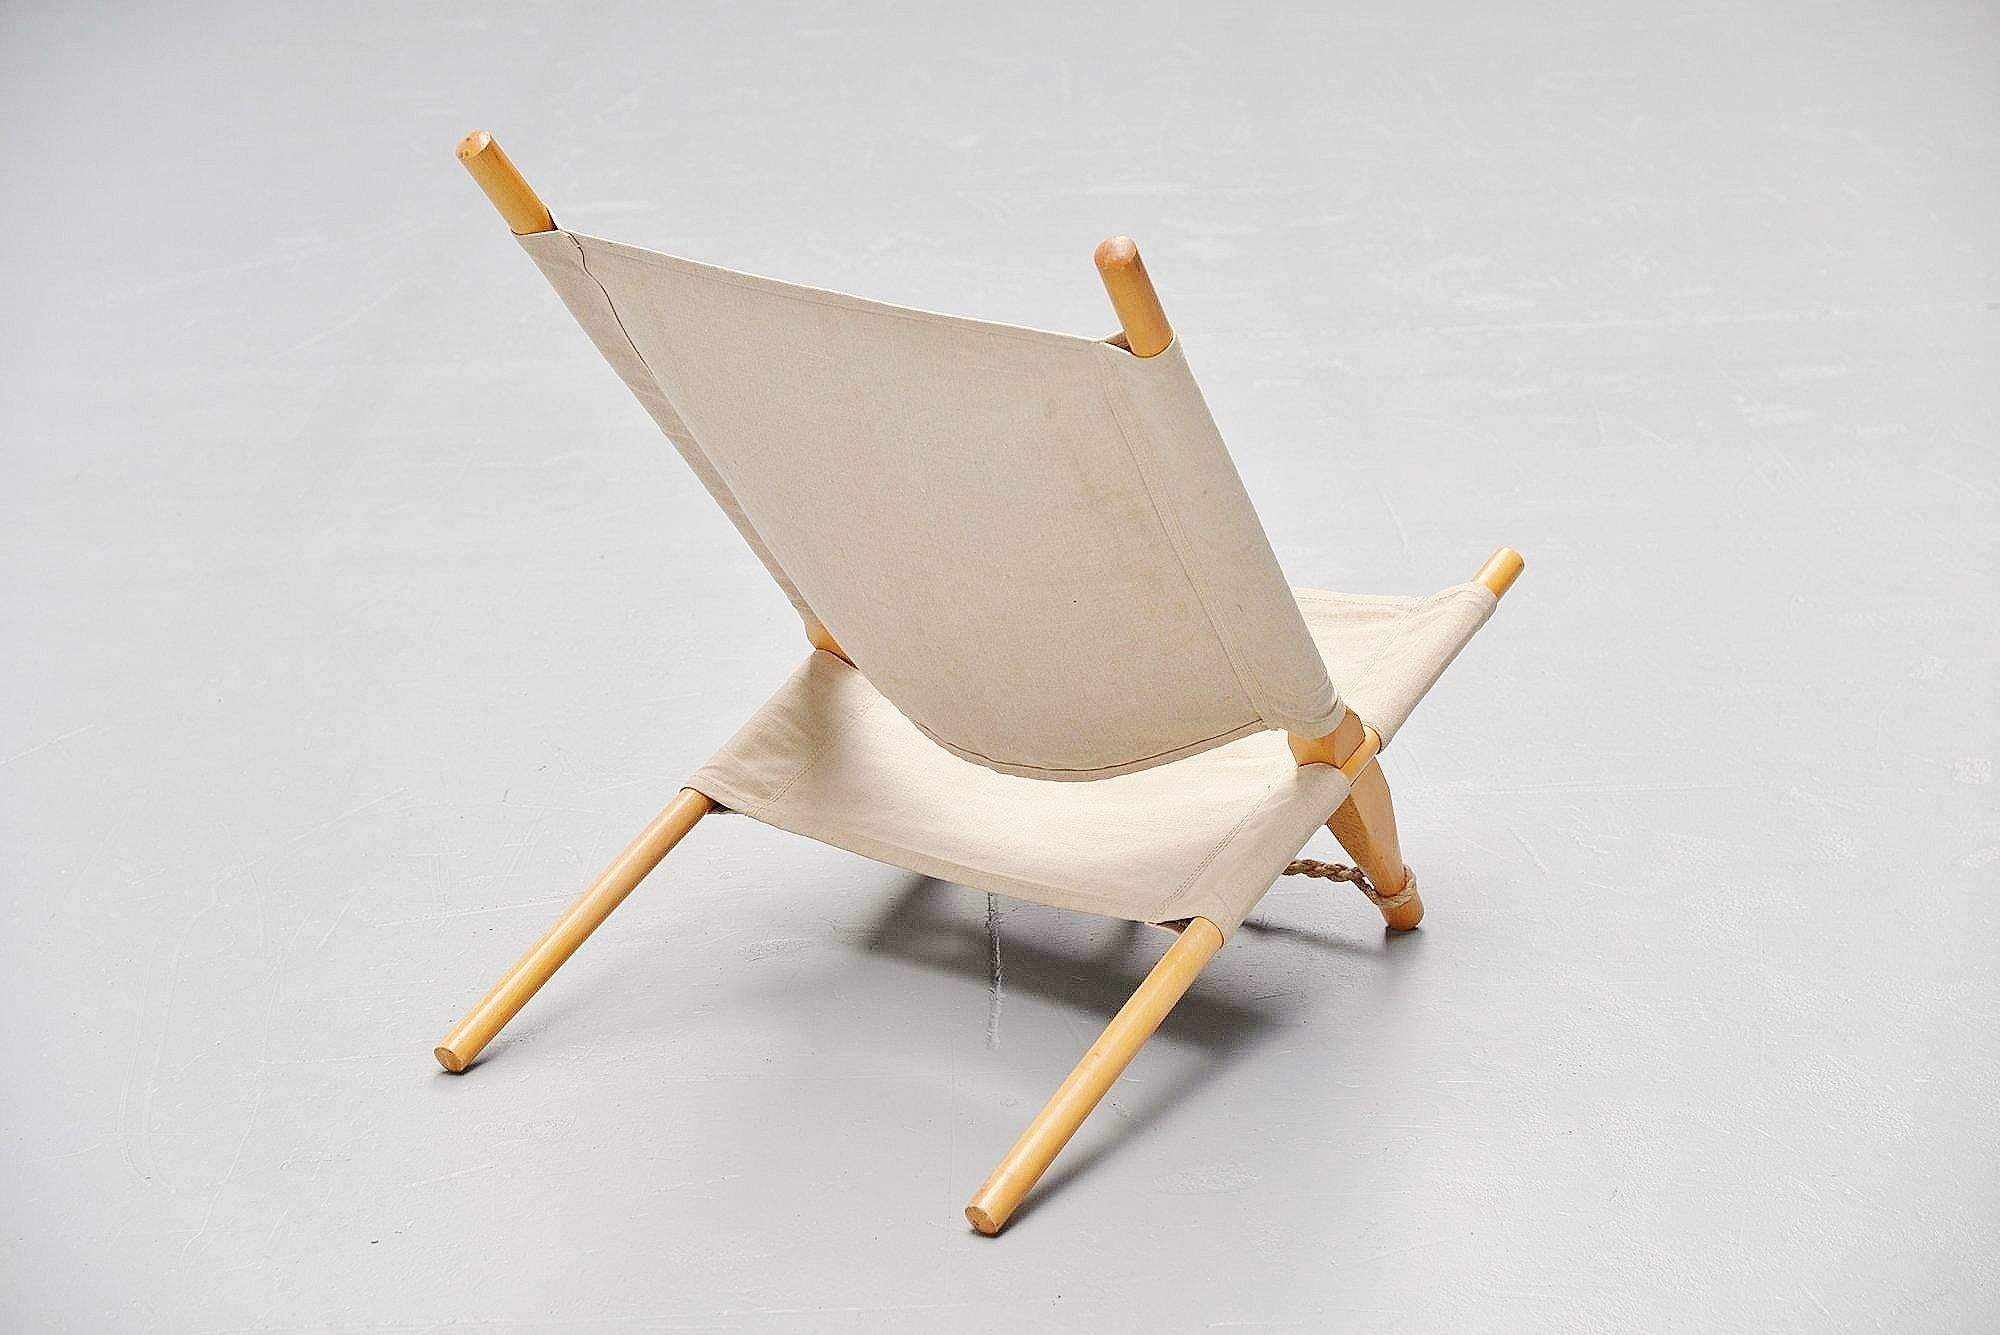 Very nice dynamic low lounge chair designed by Ole Gjerlov Knudsen, manufactured by Cado, Denmark, 1958. The chair has a birch wooden frame existing in four parts sliding in each other to change the angle if wanted. The canvas seat and the rope